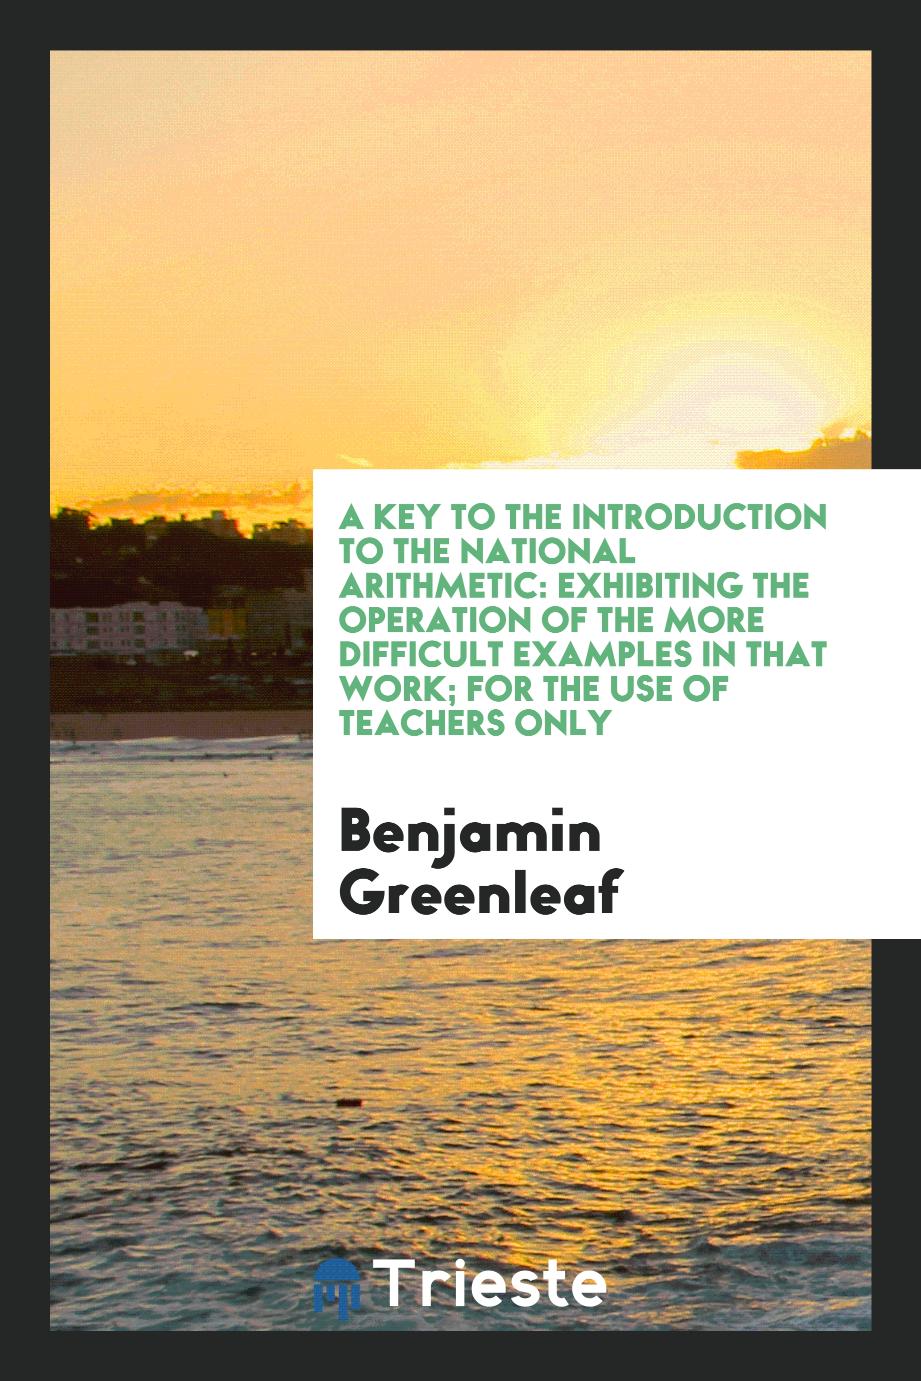 A Key to the Introduction to the National Arithmetic: Exhibiting the Operation of the More Difficult Examples in That Work; For the Use of Teachers Only